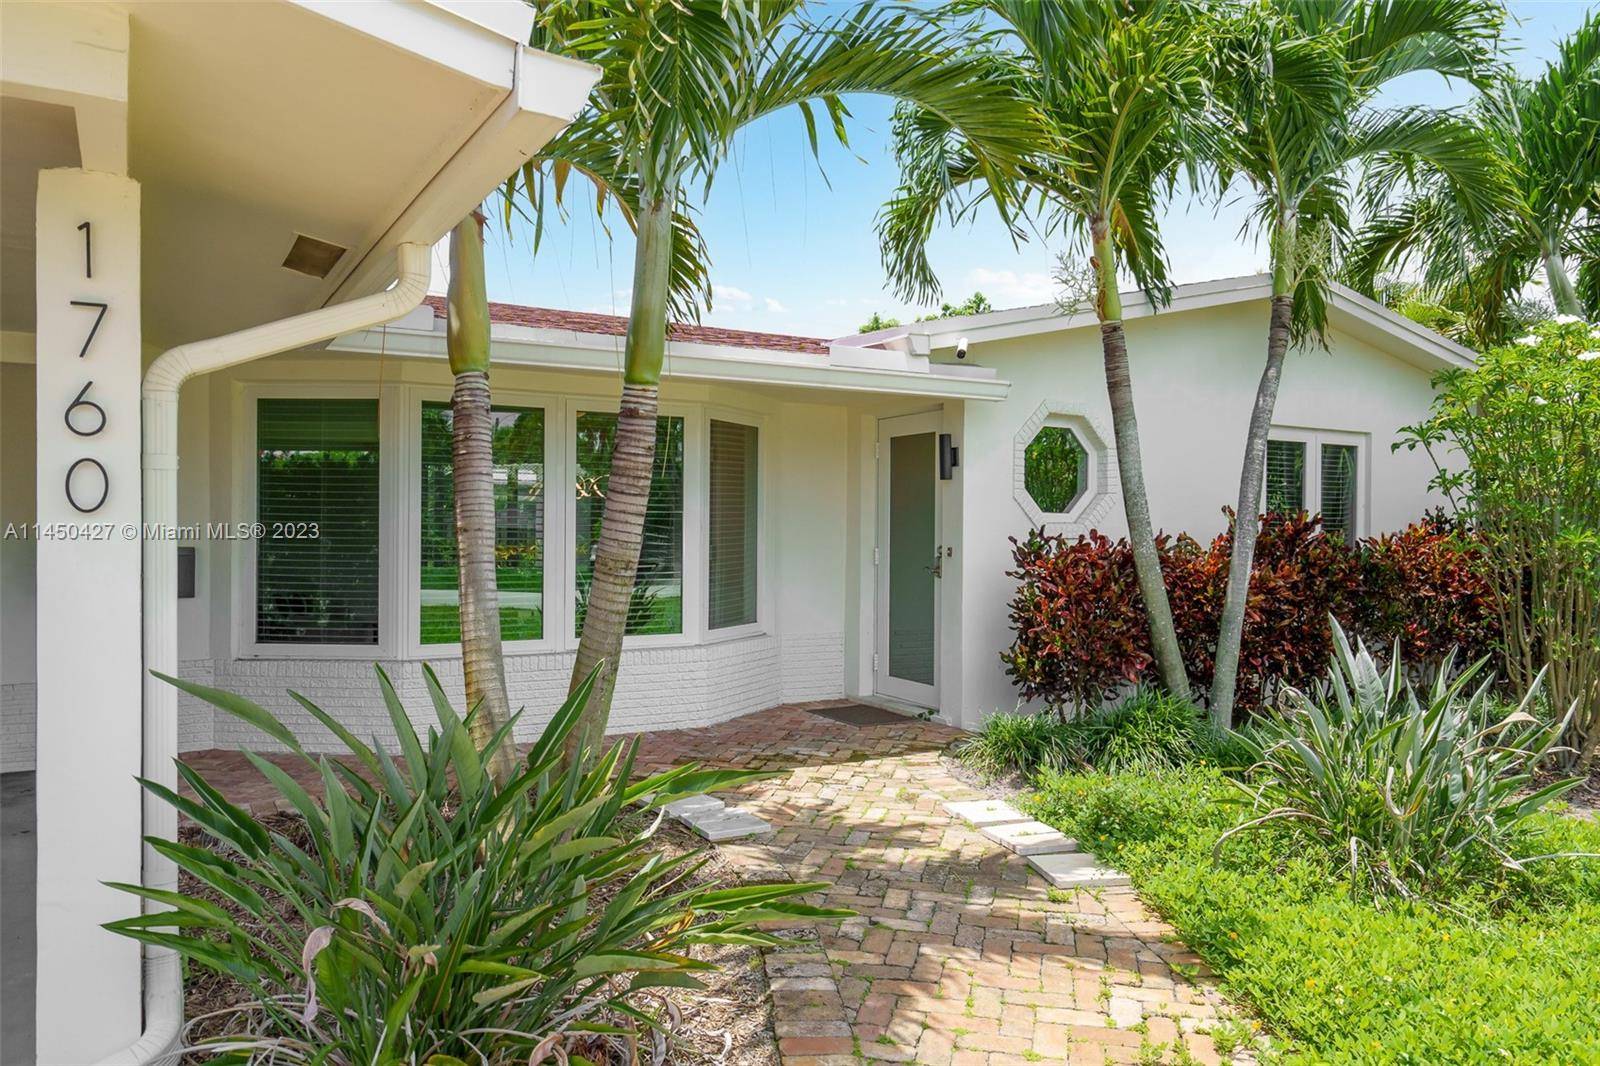 GORGEOUS TURNKEY FULLY FURNISHED 2 2 Single Family Home in Oakland Park located only 10 mts from Wilton Manors and 15 mts from Ft Lauderdale Beach.